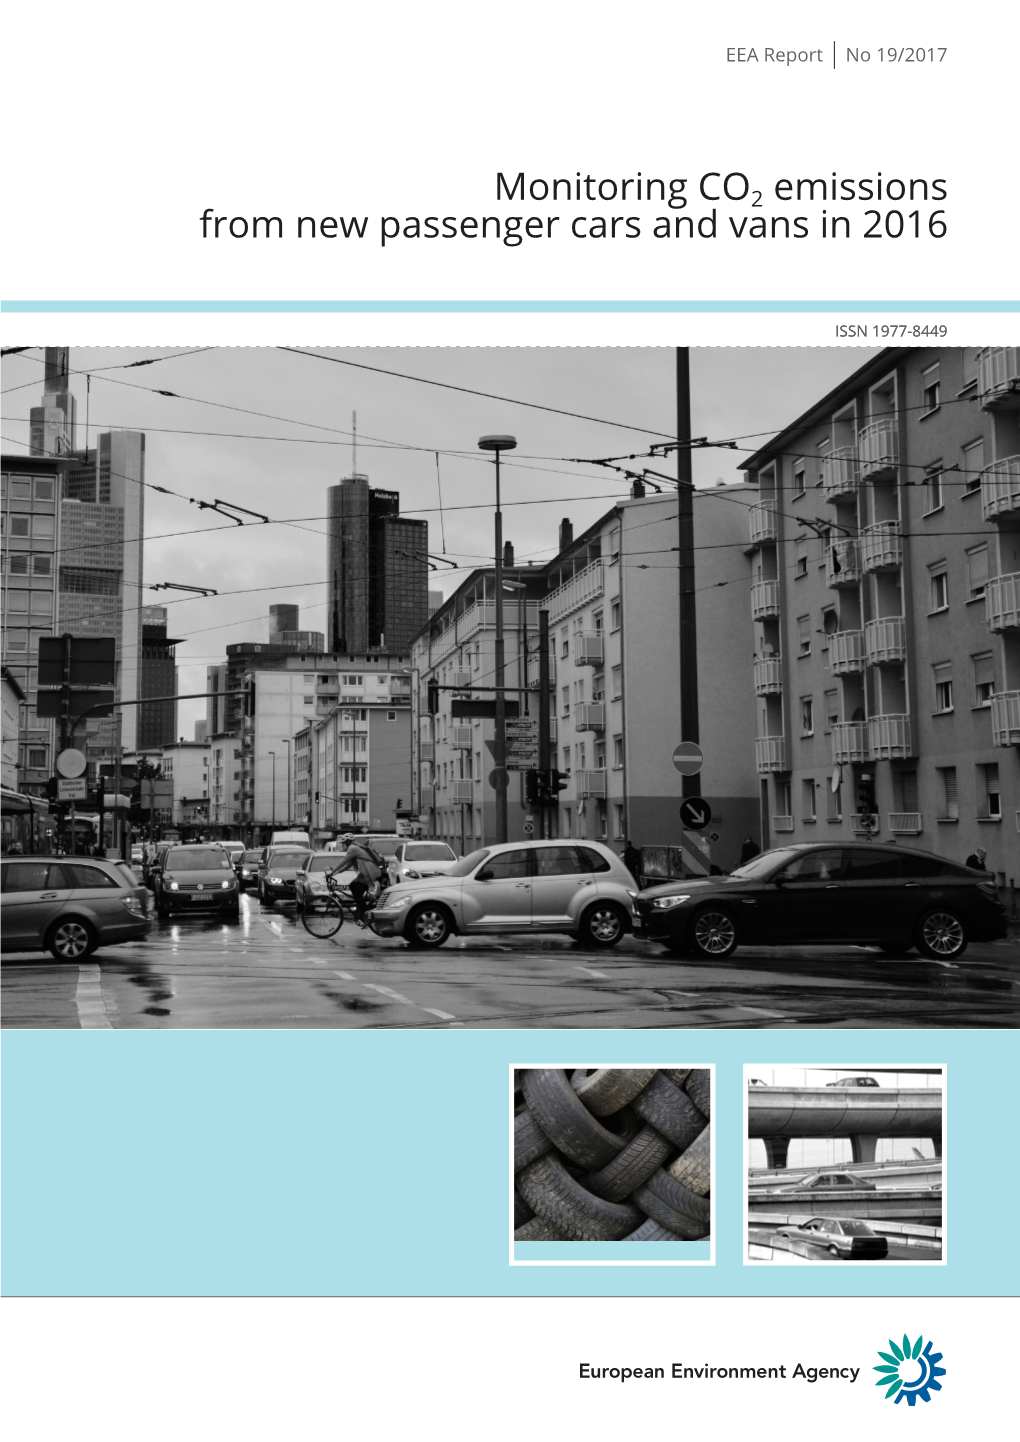 Monitoring CO2 Emissions from Passenger Cars And